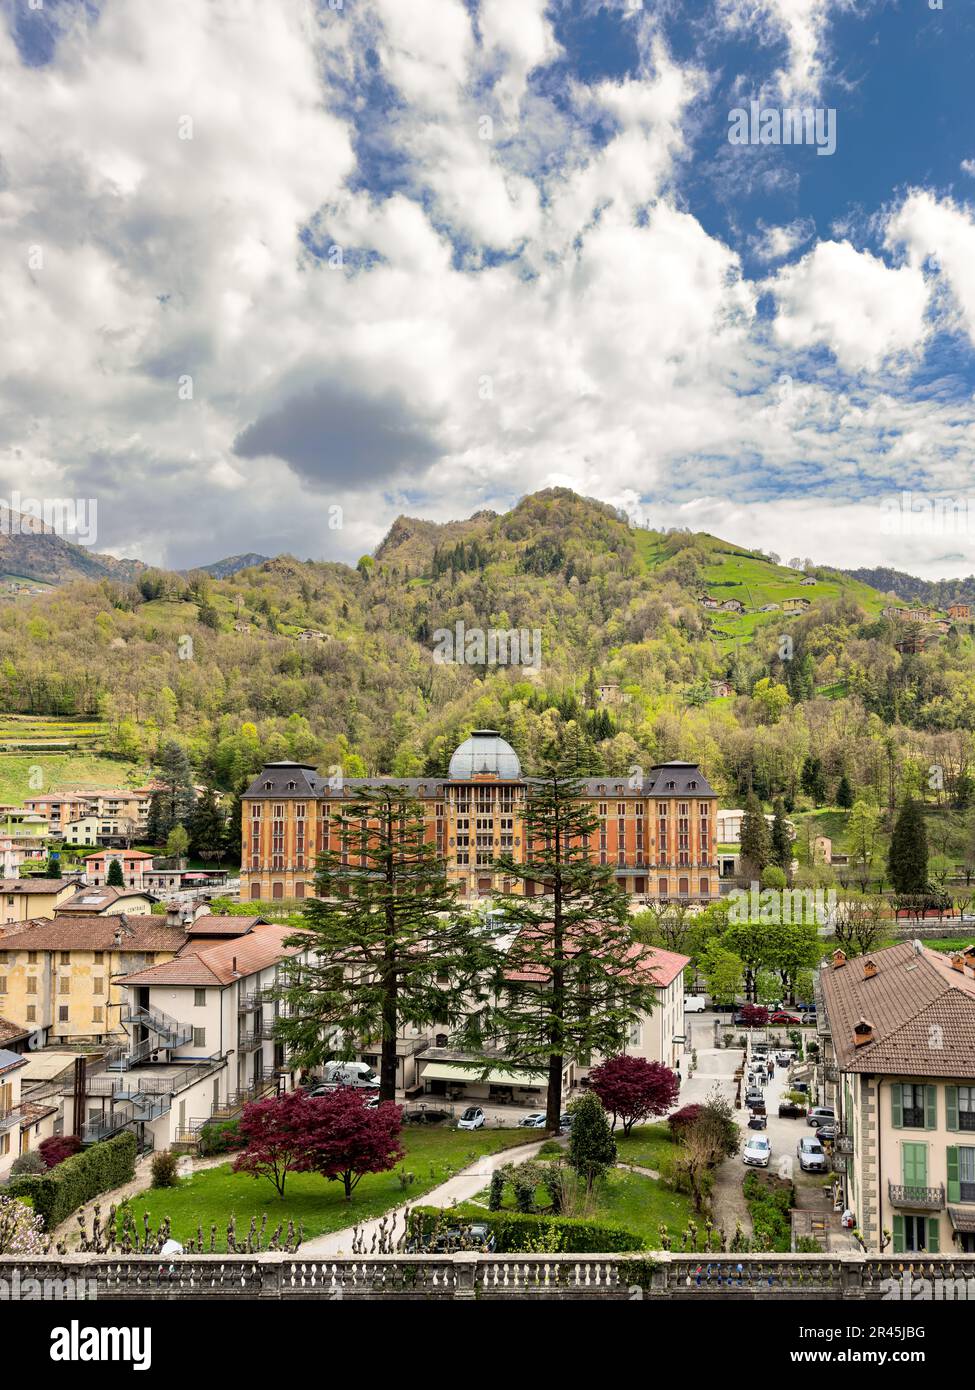 View of San Pellegrino Terme in Bergamo, Lombardy, Italy as seen from the QC San Pellegrino Spa. The empty Grand Hotel can be seen in the image. Stock Photo